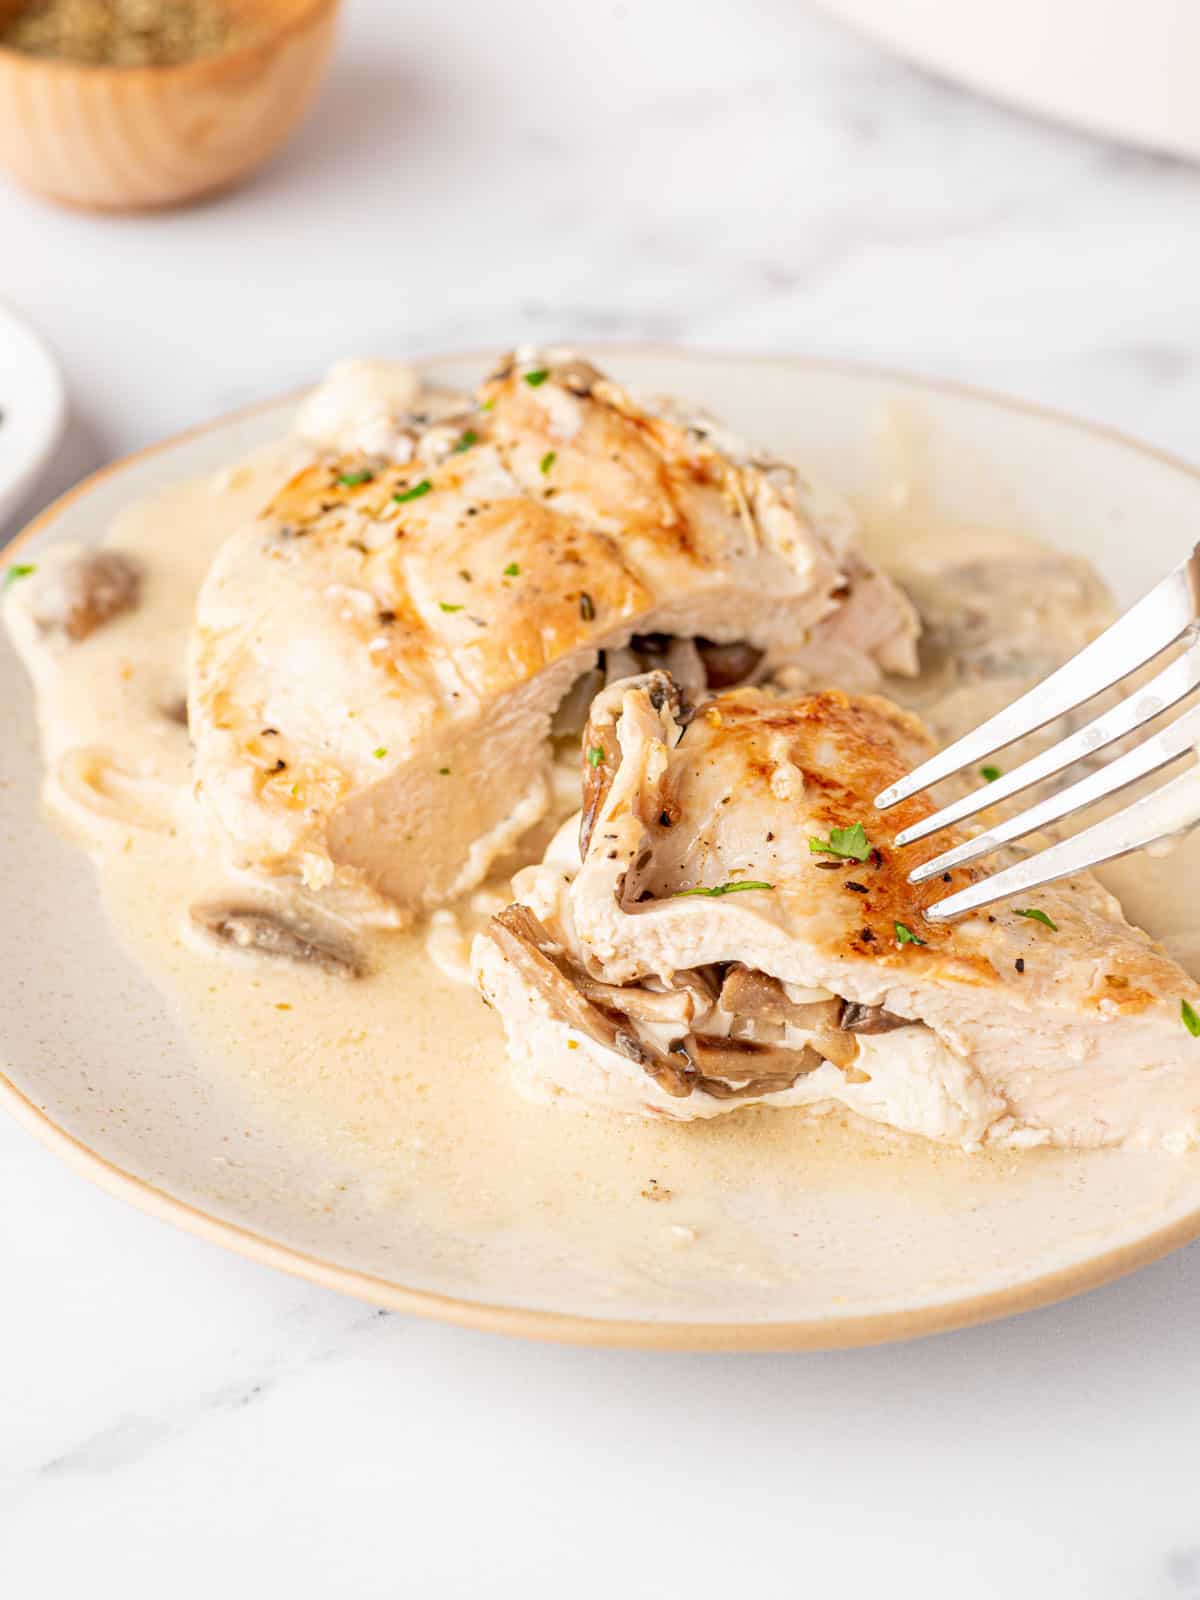 A fork is poised over a bite sized piece of chicken on a plate of mushroom stuffed chicken.